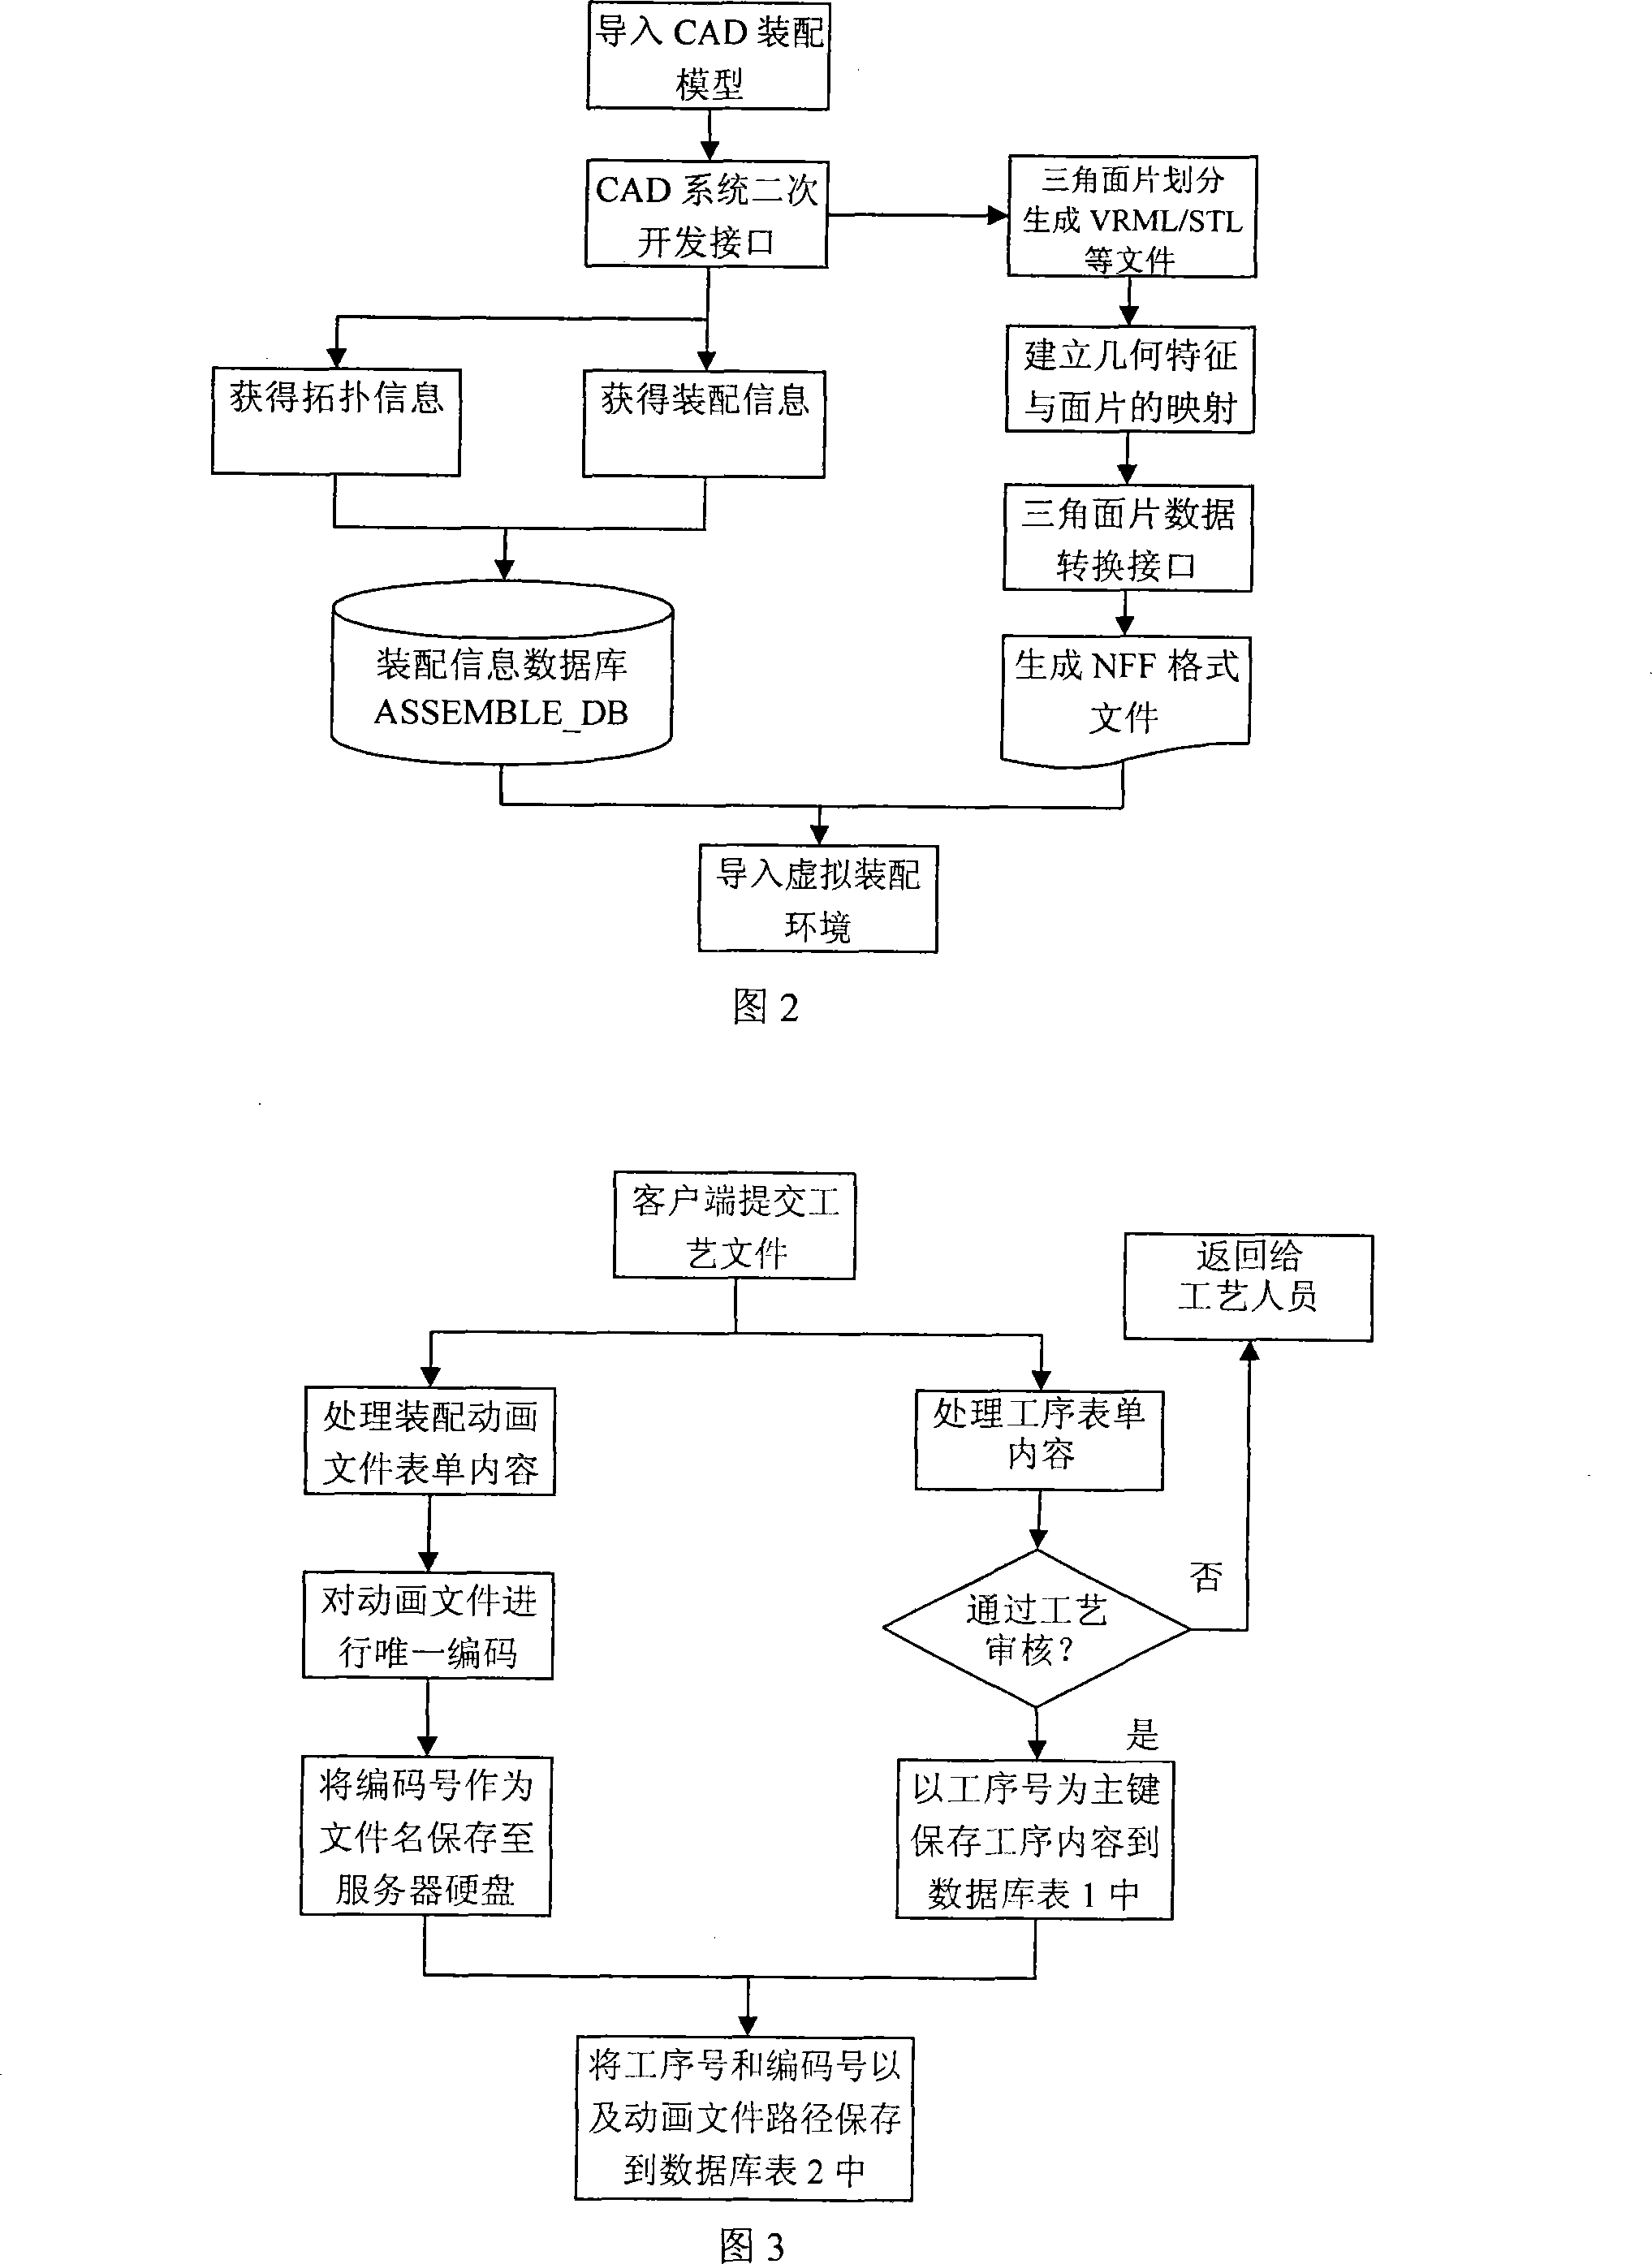 Method for implementing three-dimensional assembly technique file and on-site teaching based on WEB